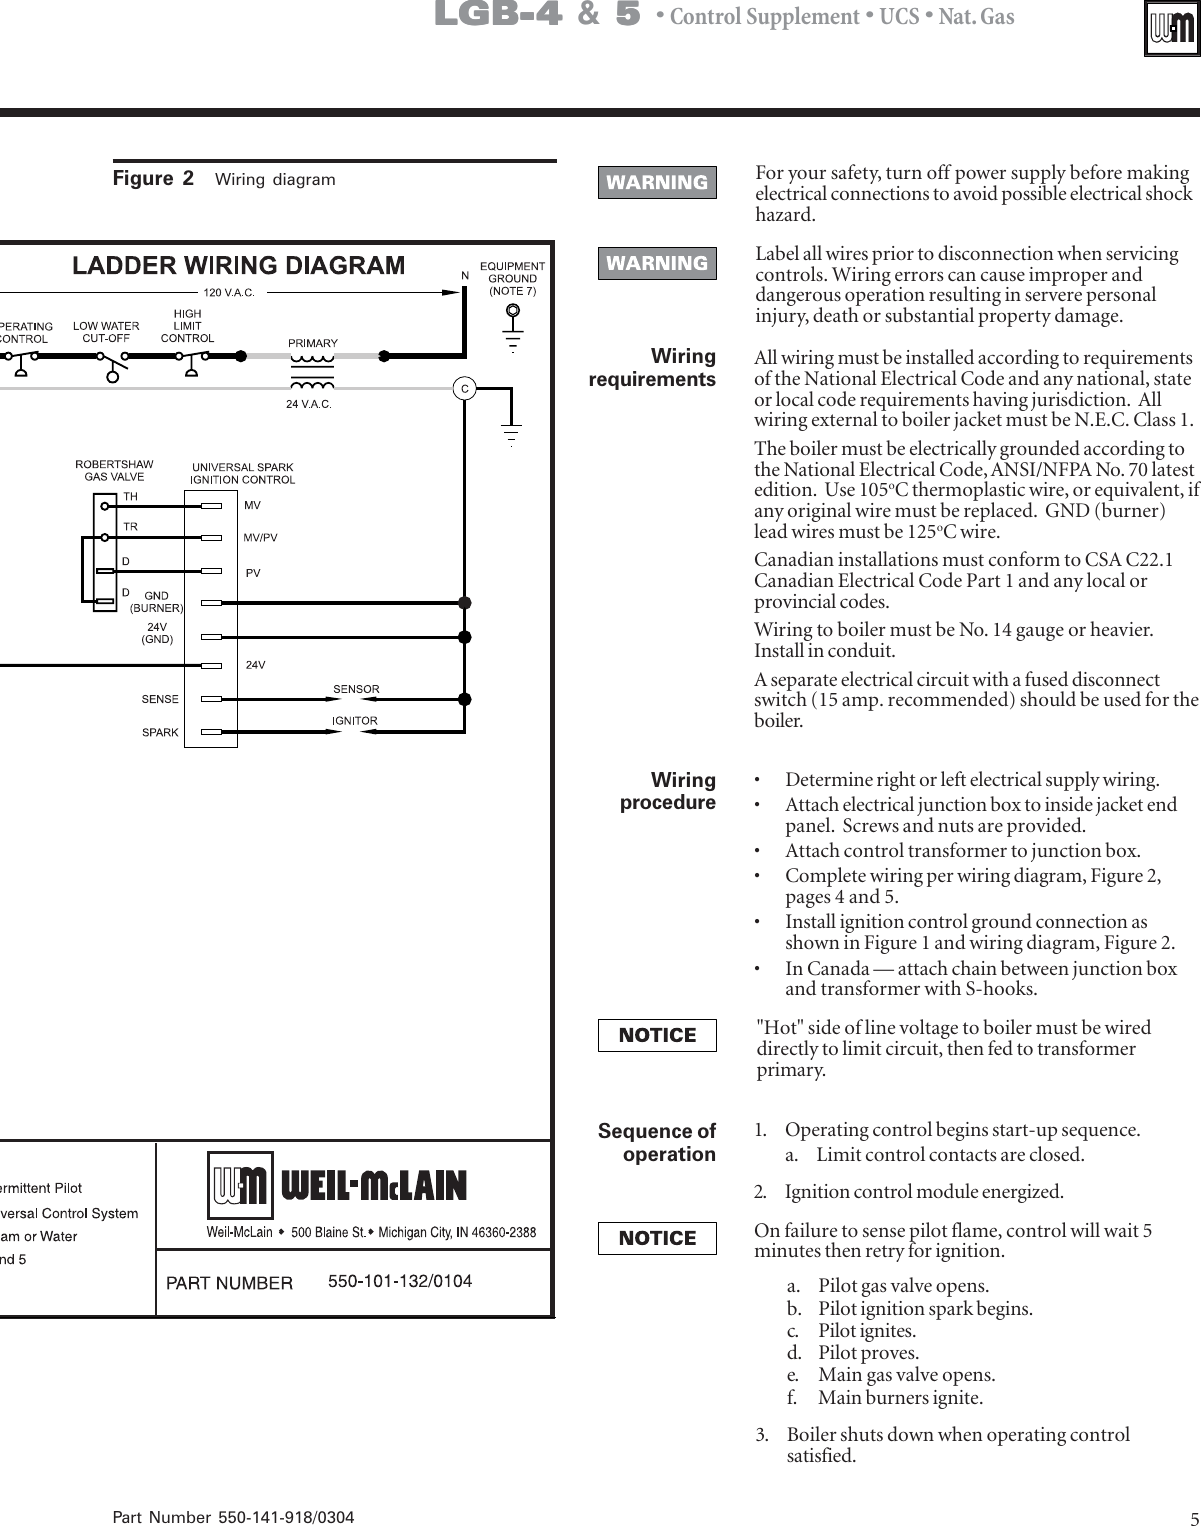 Page 5 of 8 - Weil-Mclain Weil-Mclain-Lgb-4-Users-Manual- 550-141-918_0304.pmd  Weil-mclain-lgb-4-users-manual